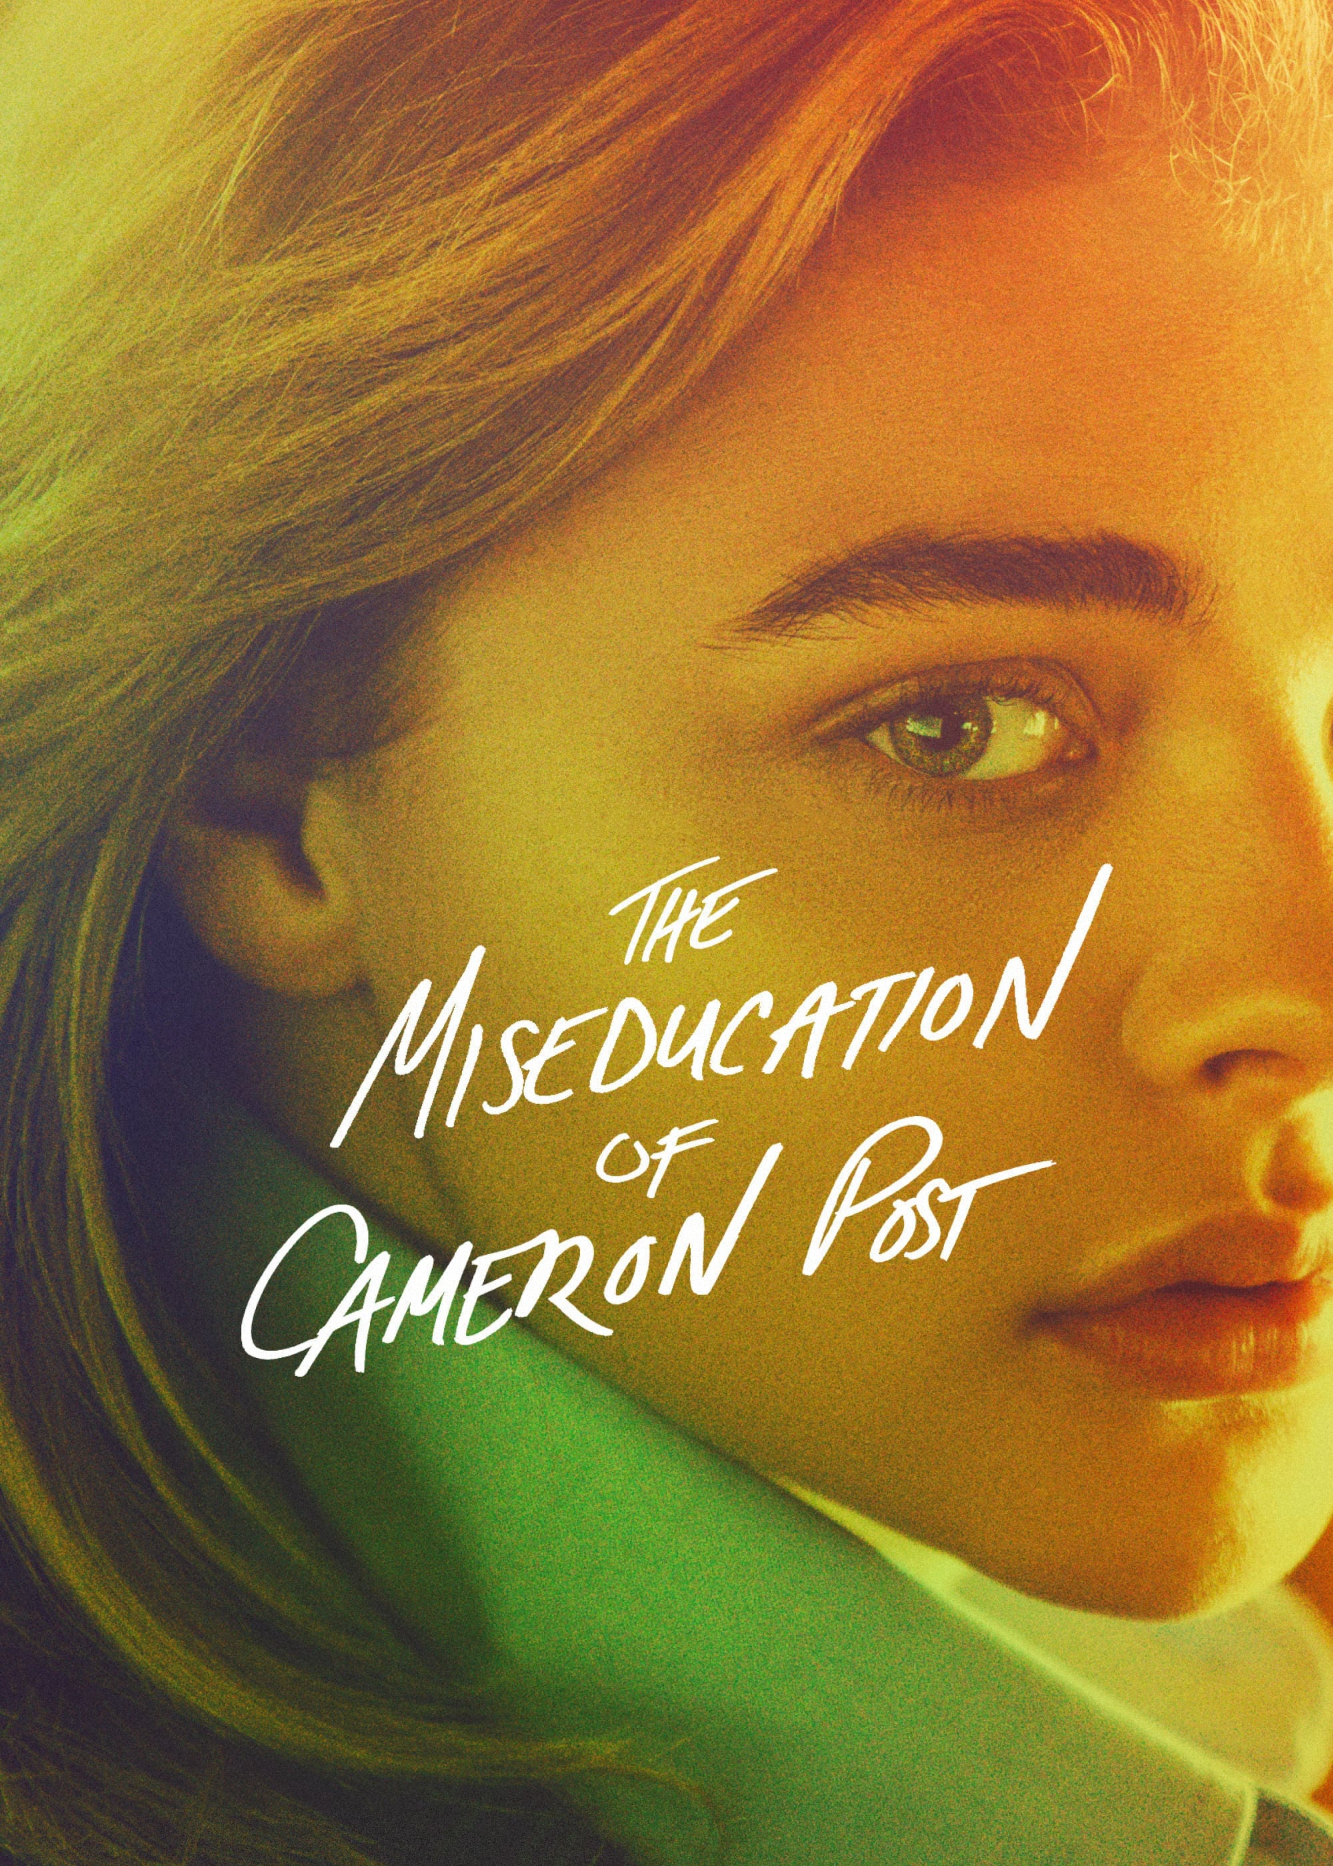 Xem Phim The Miseducation of Cameron Post (The Miseducation of Cameron Post)